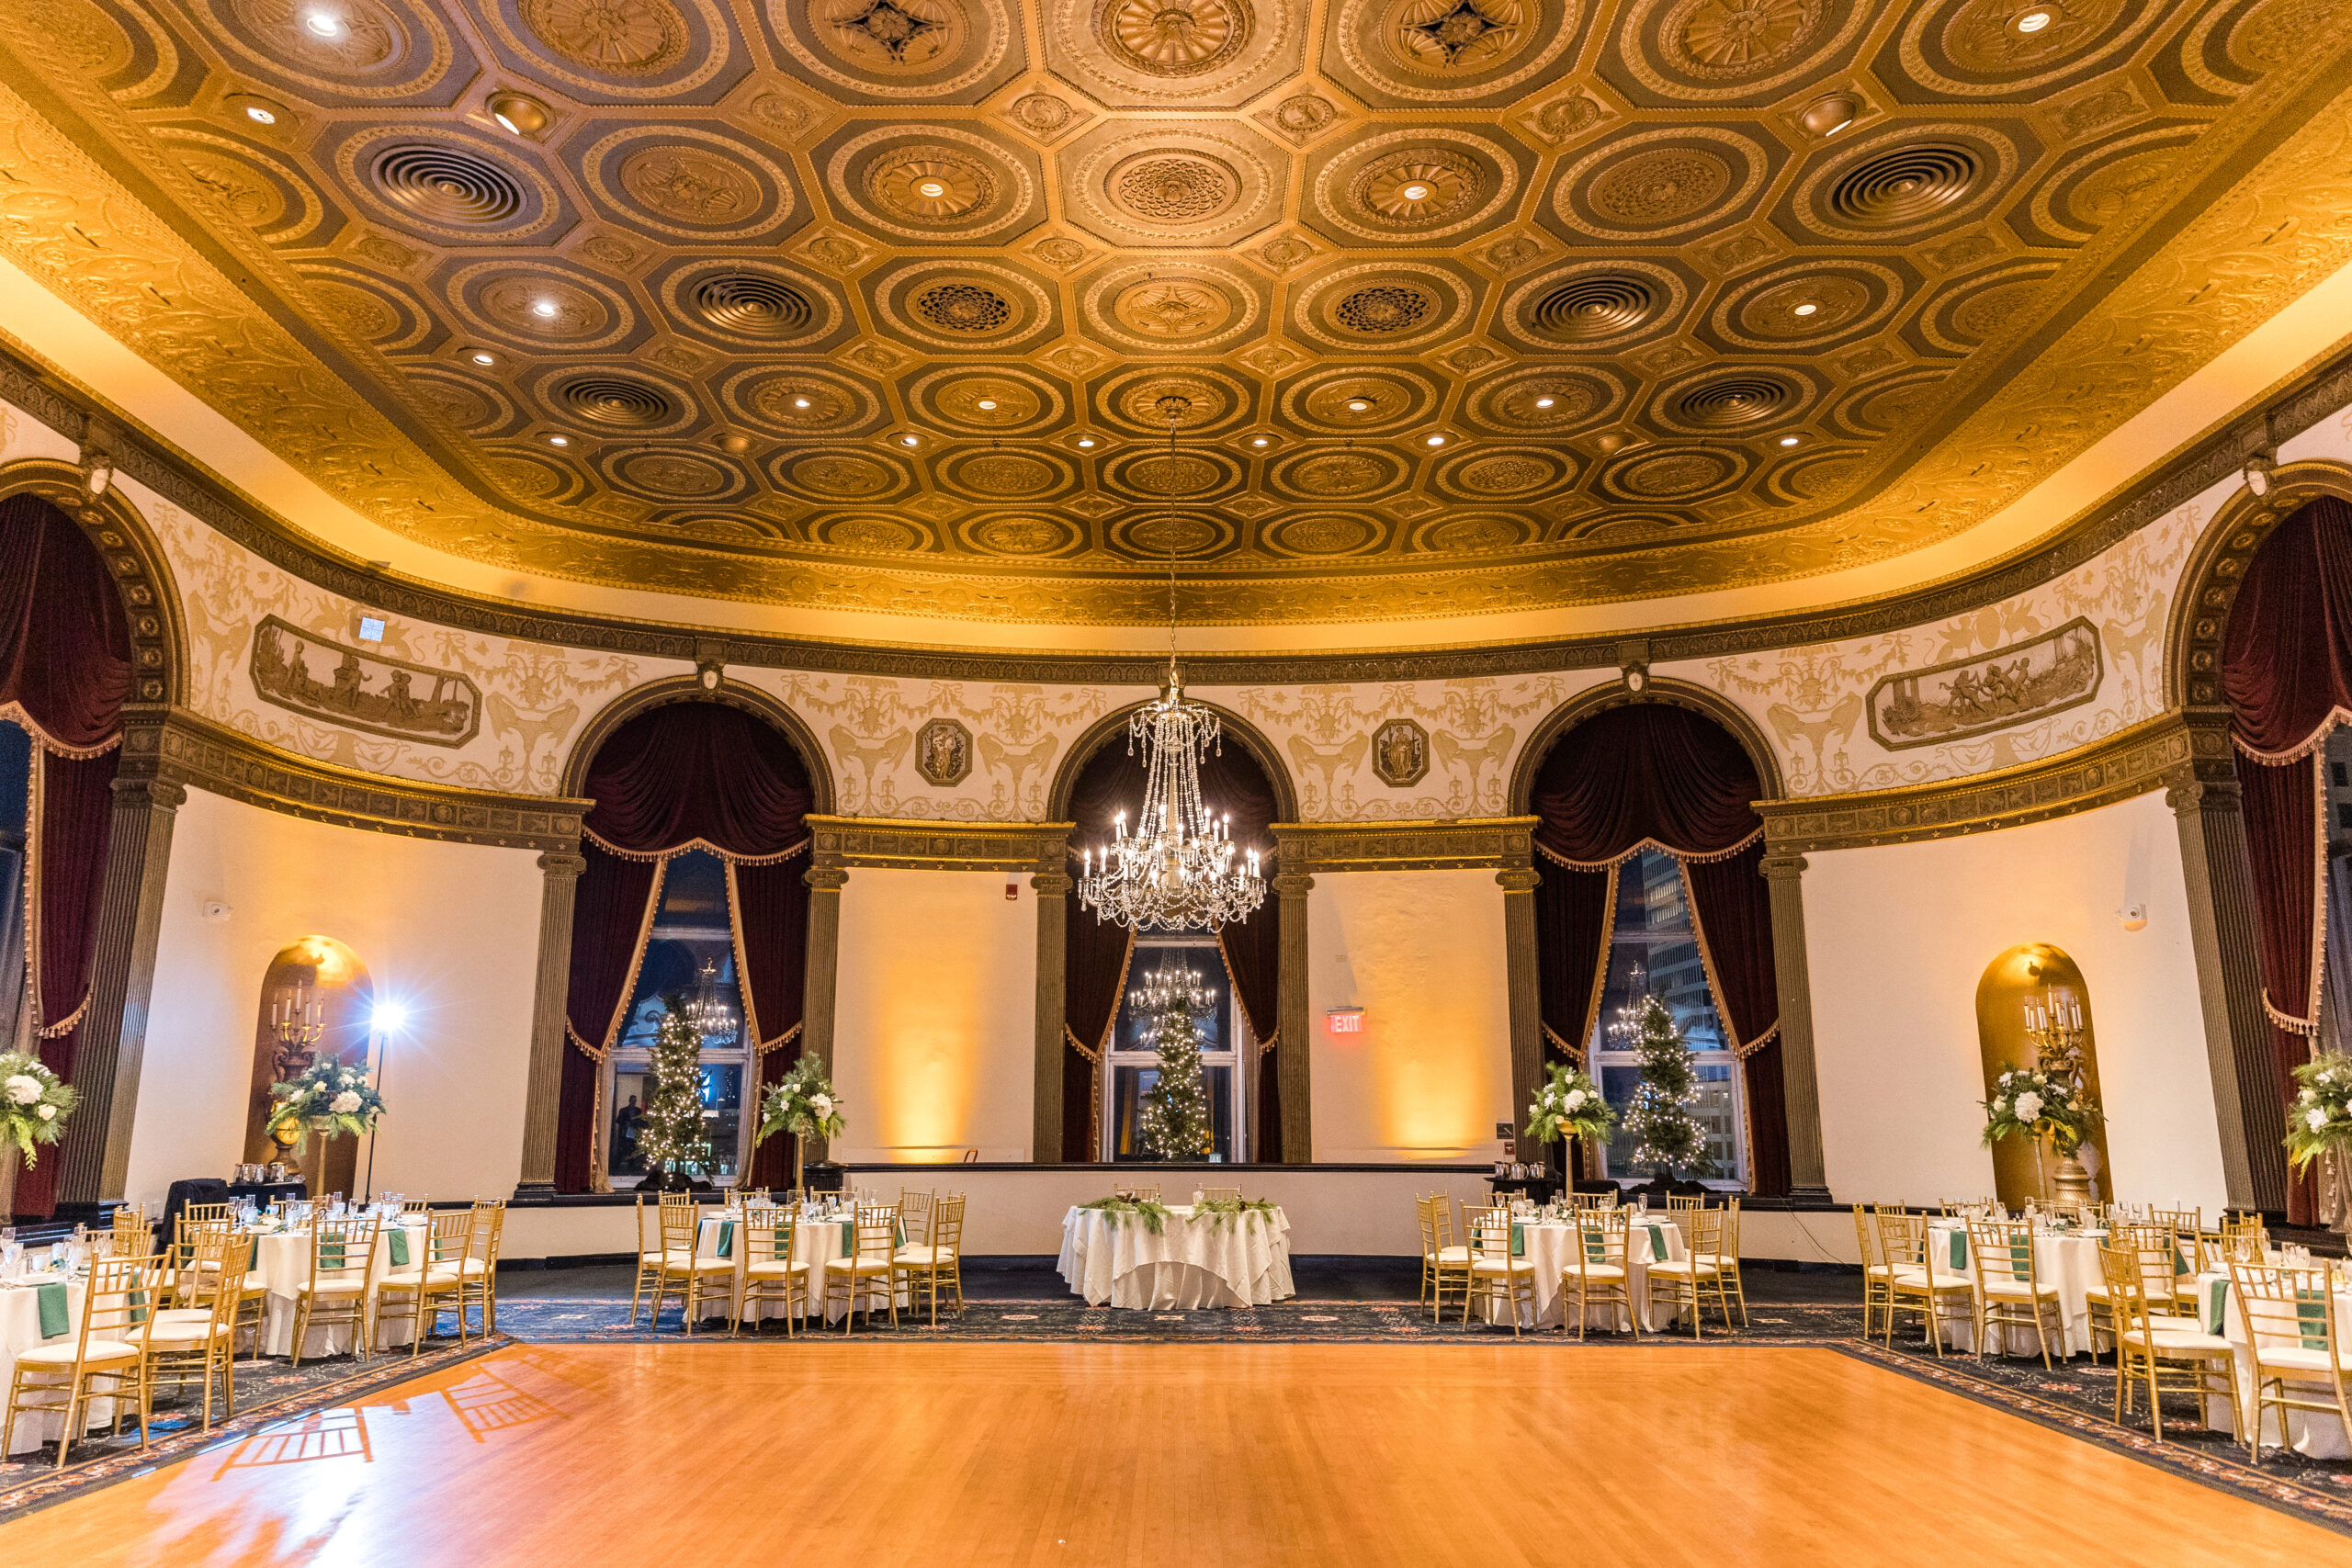 The Biltmore Ballroom at the Graduate Hotel in Providence is brilliantly decorated for a Winter Reception.